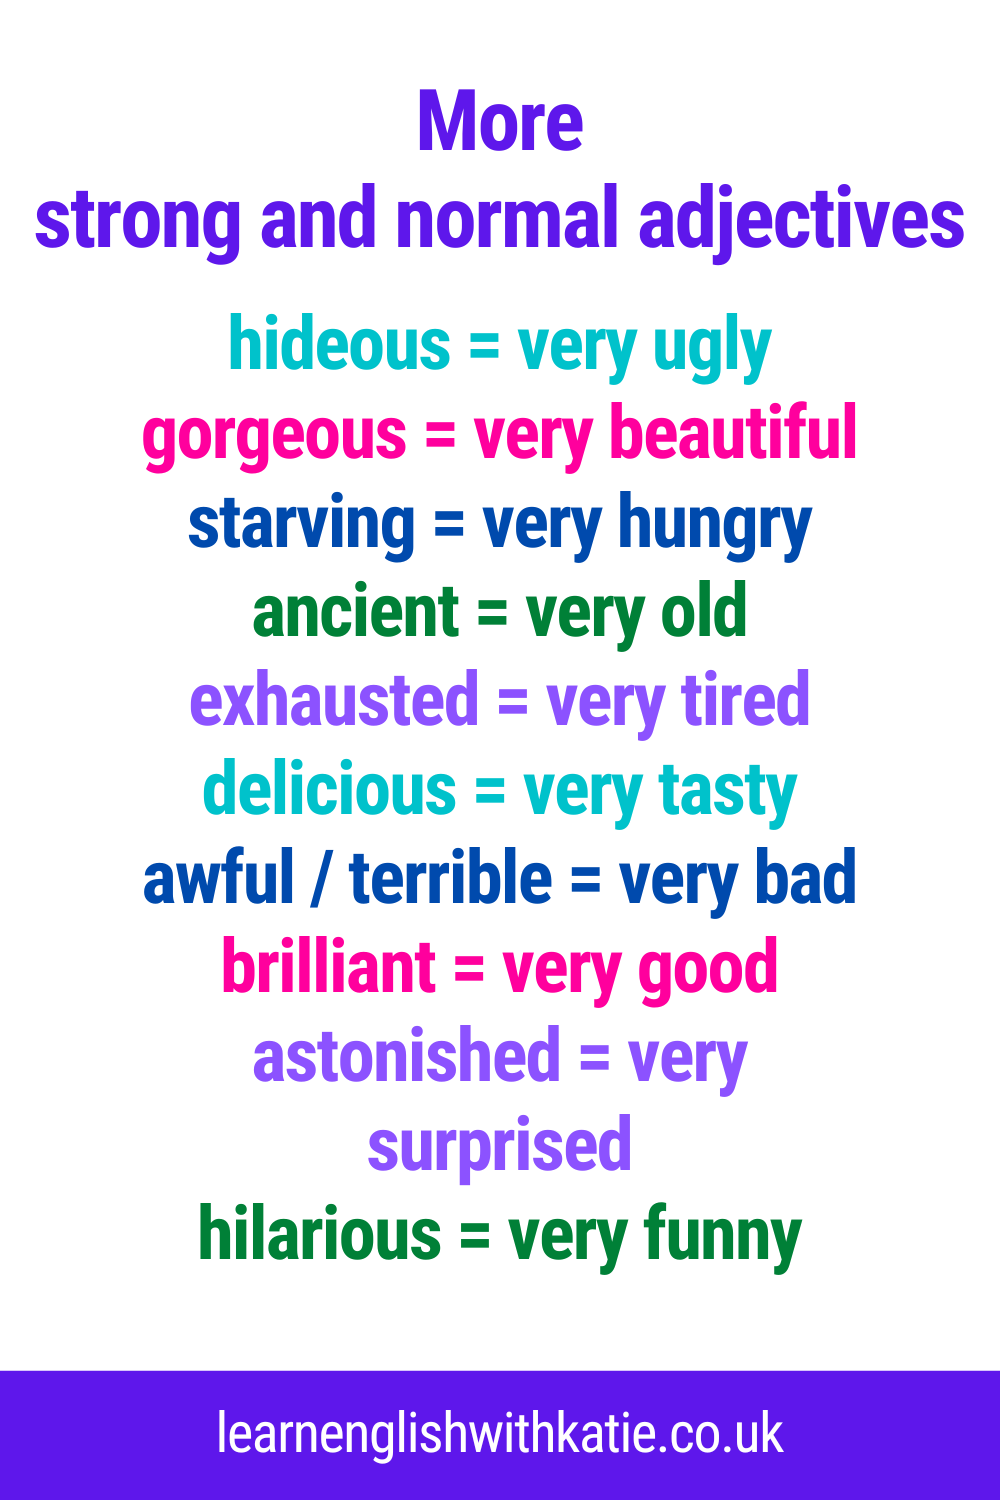 Pinterest pin showing more strong and normal adjectives